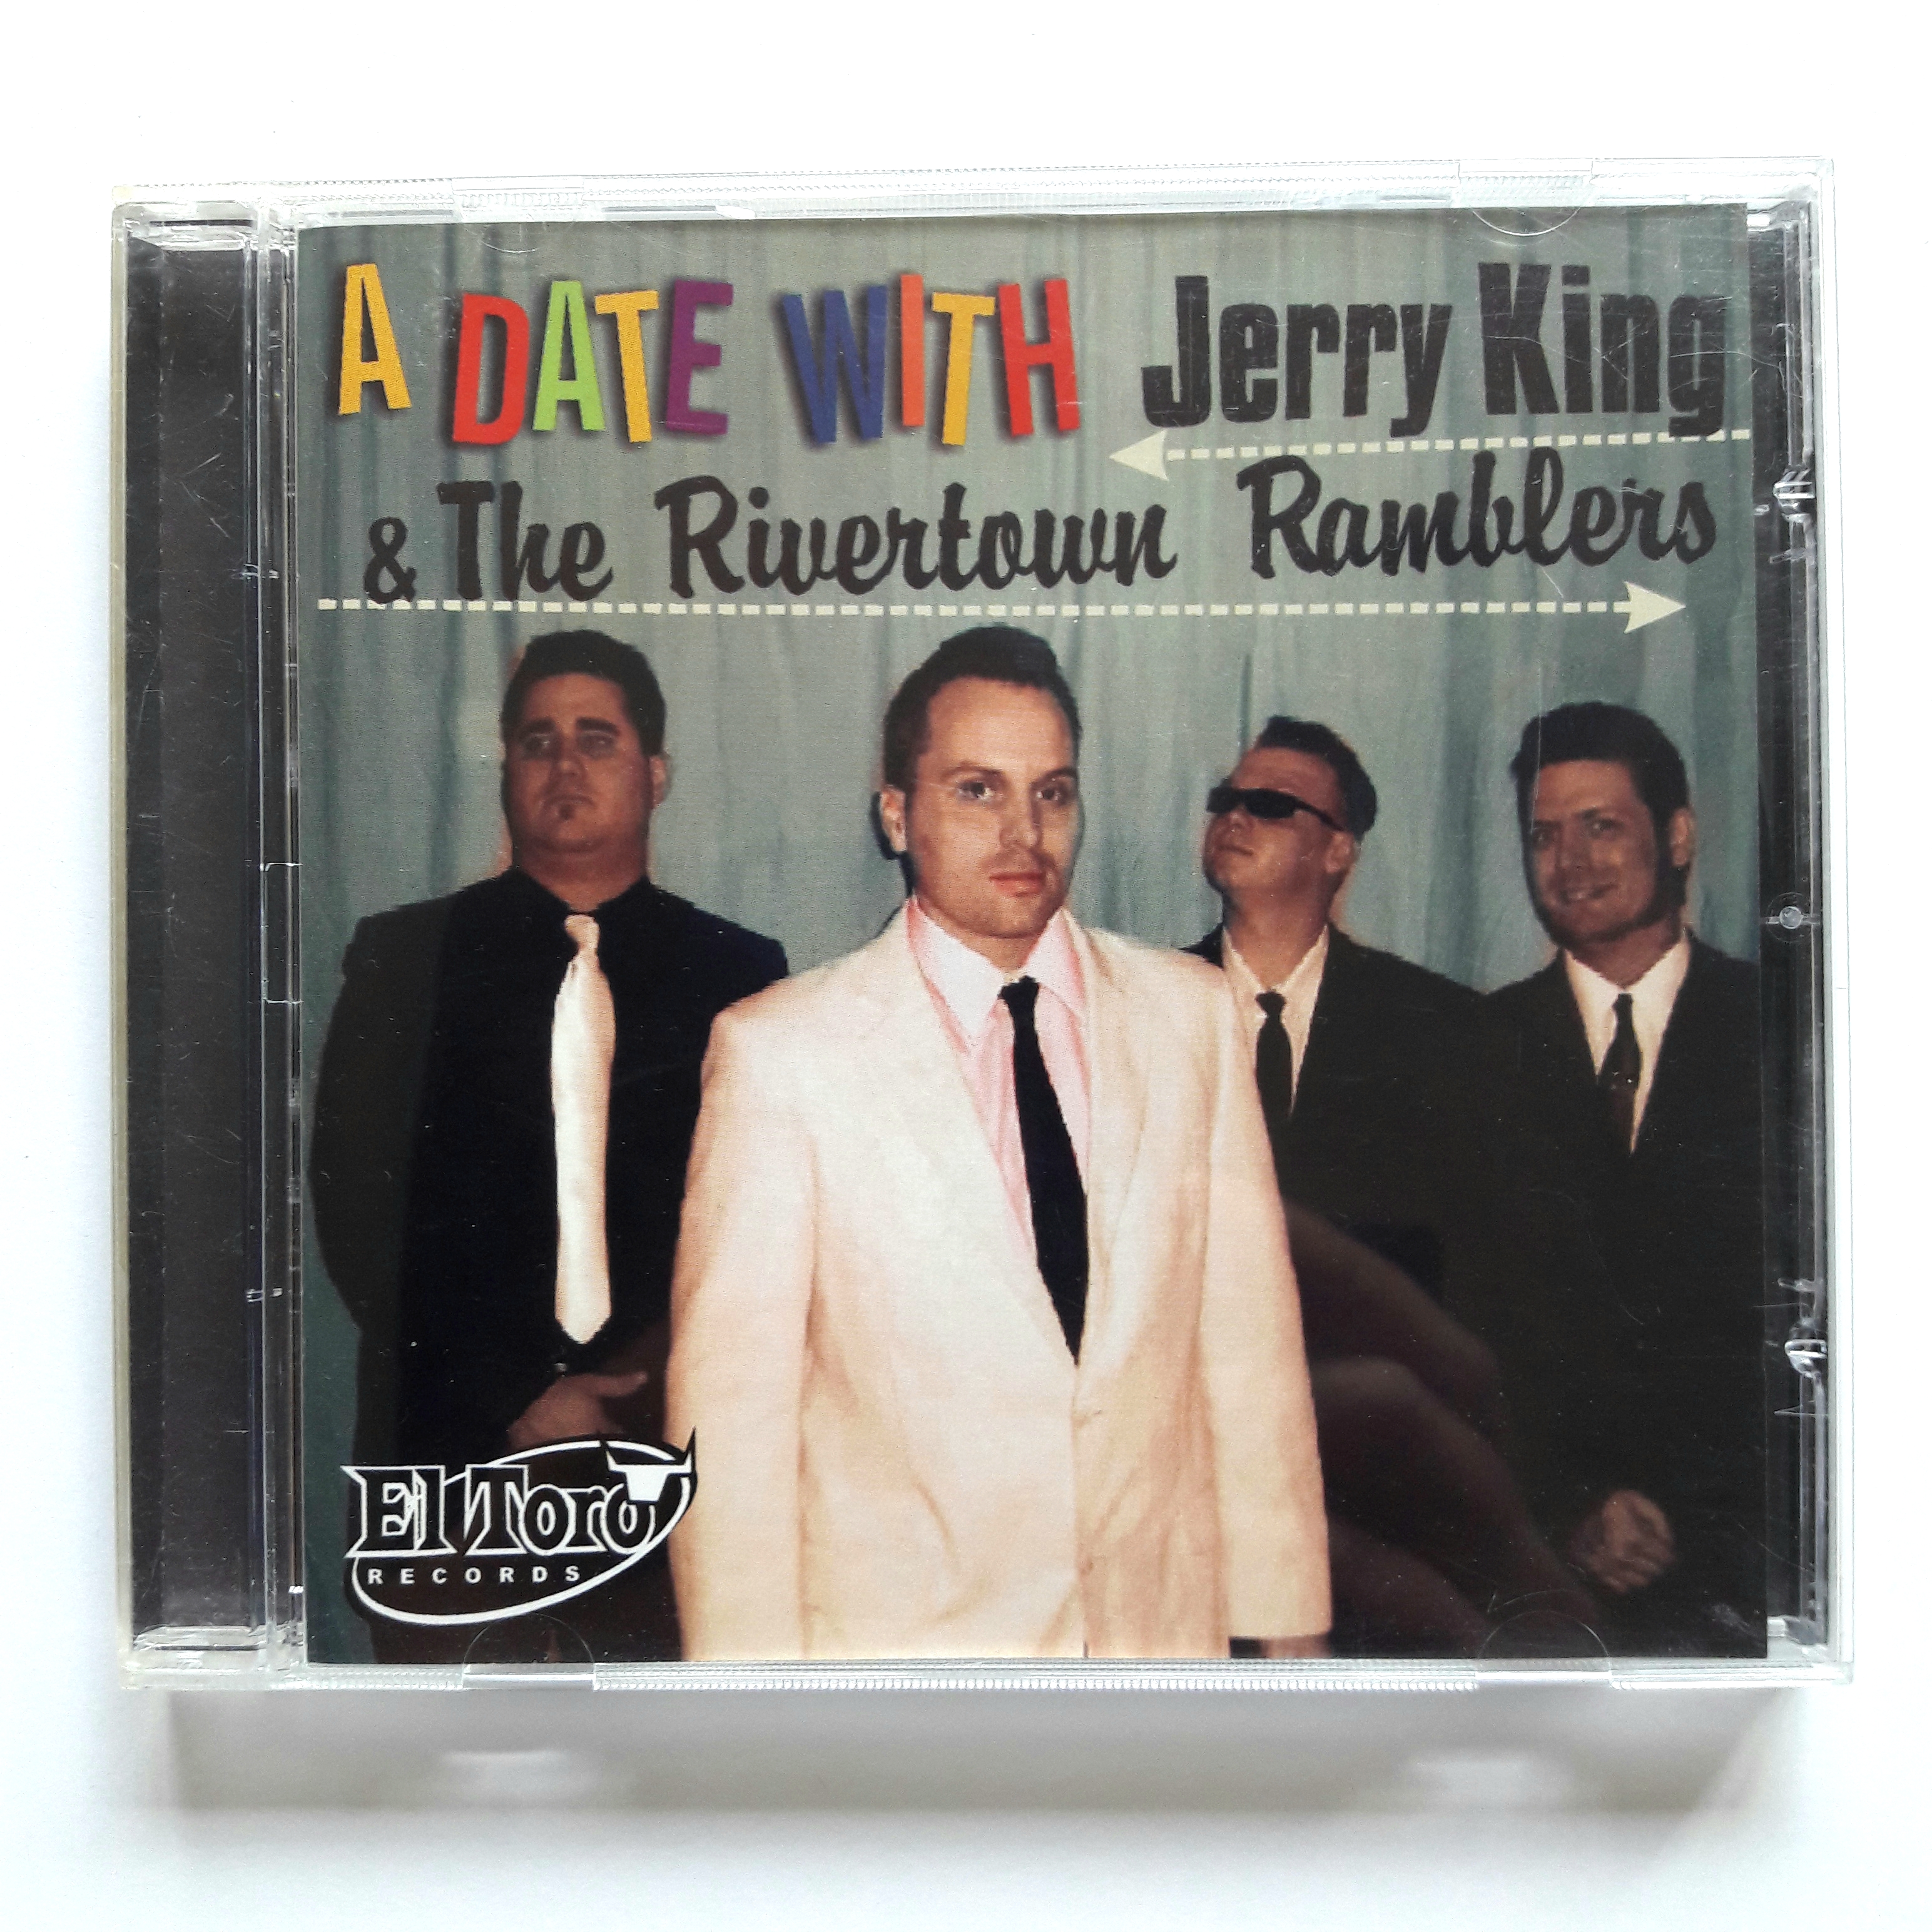 Jerry King - A Date With